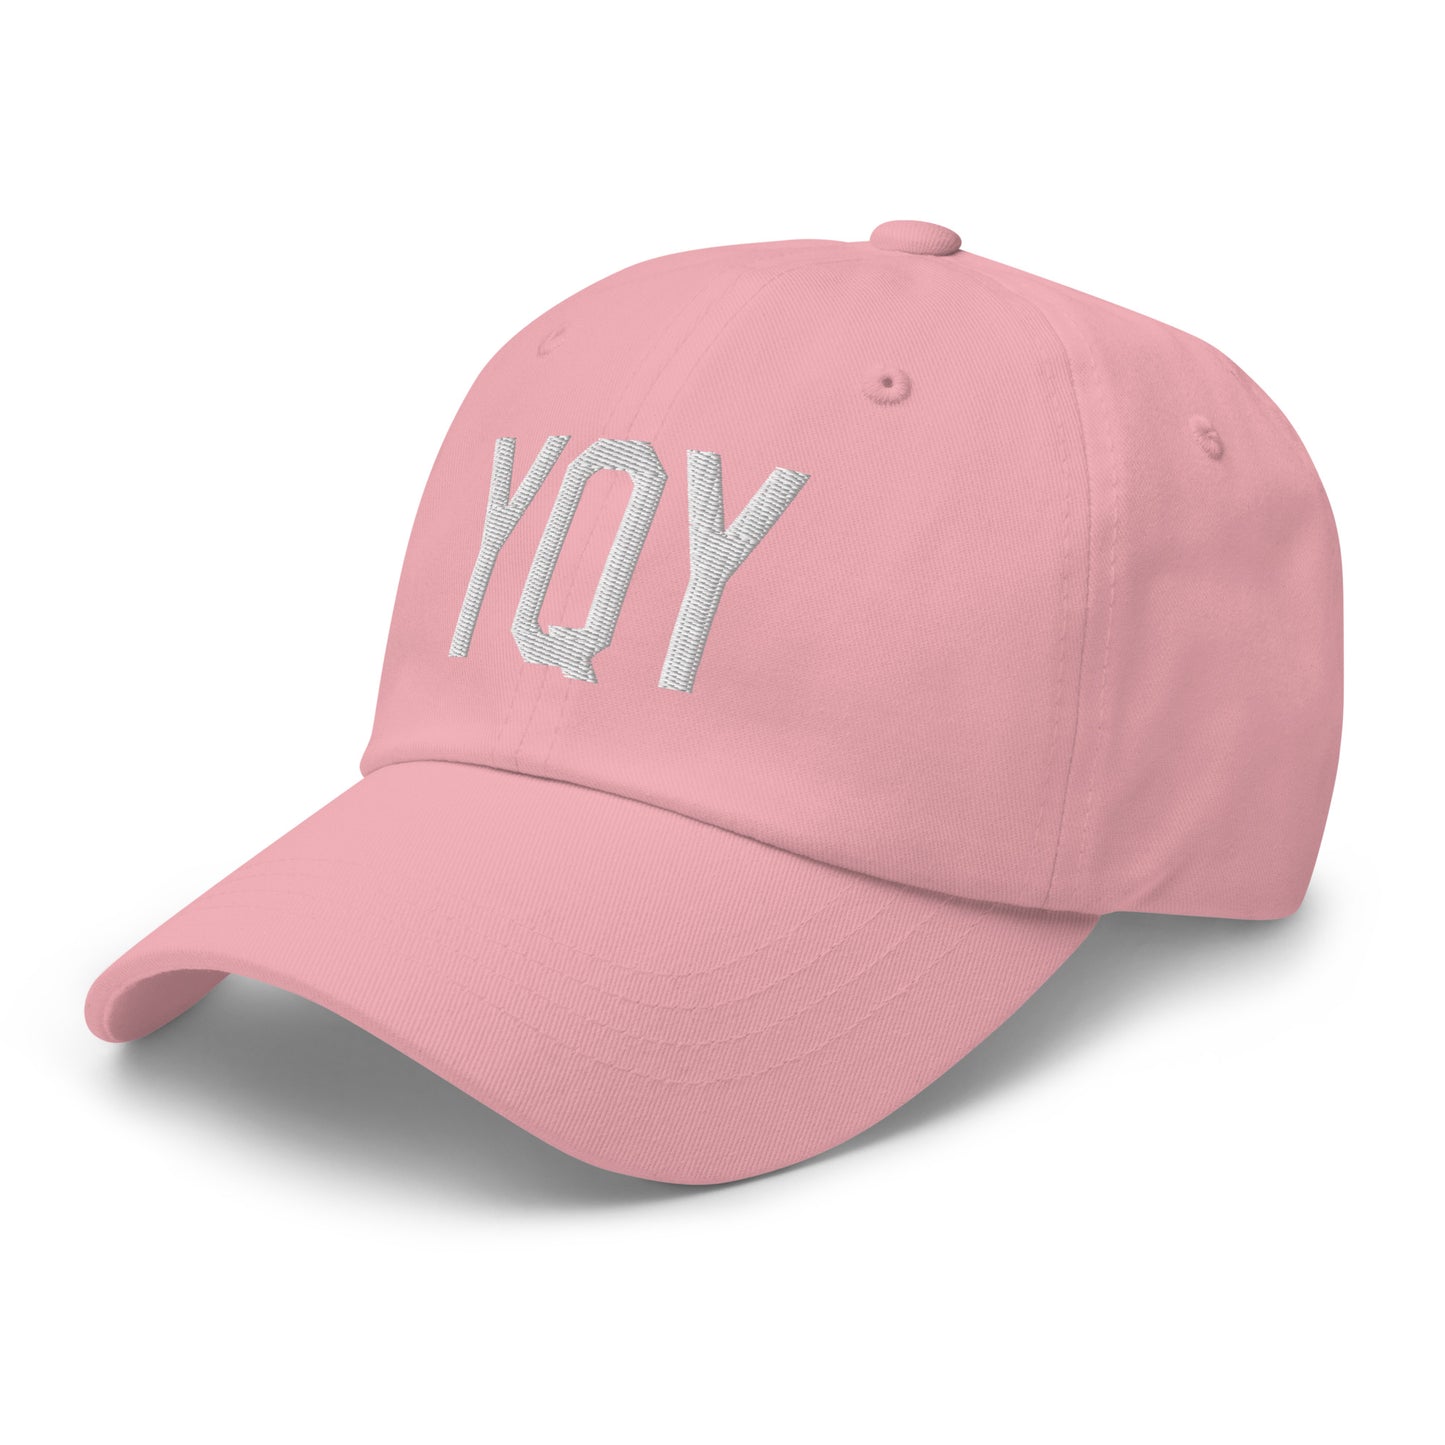 Airport Code Baseball Cap - White • YQY Sydney • YHM Designs - Image 27